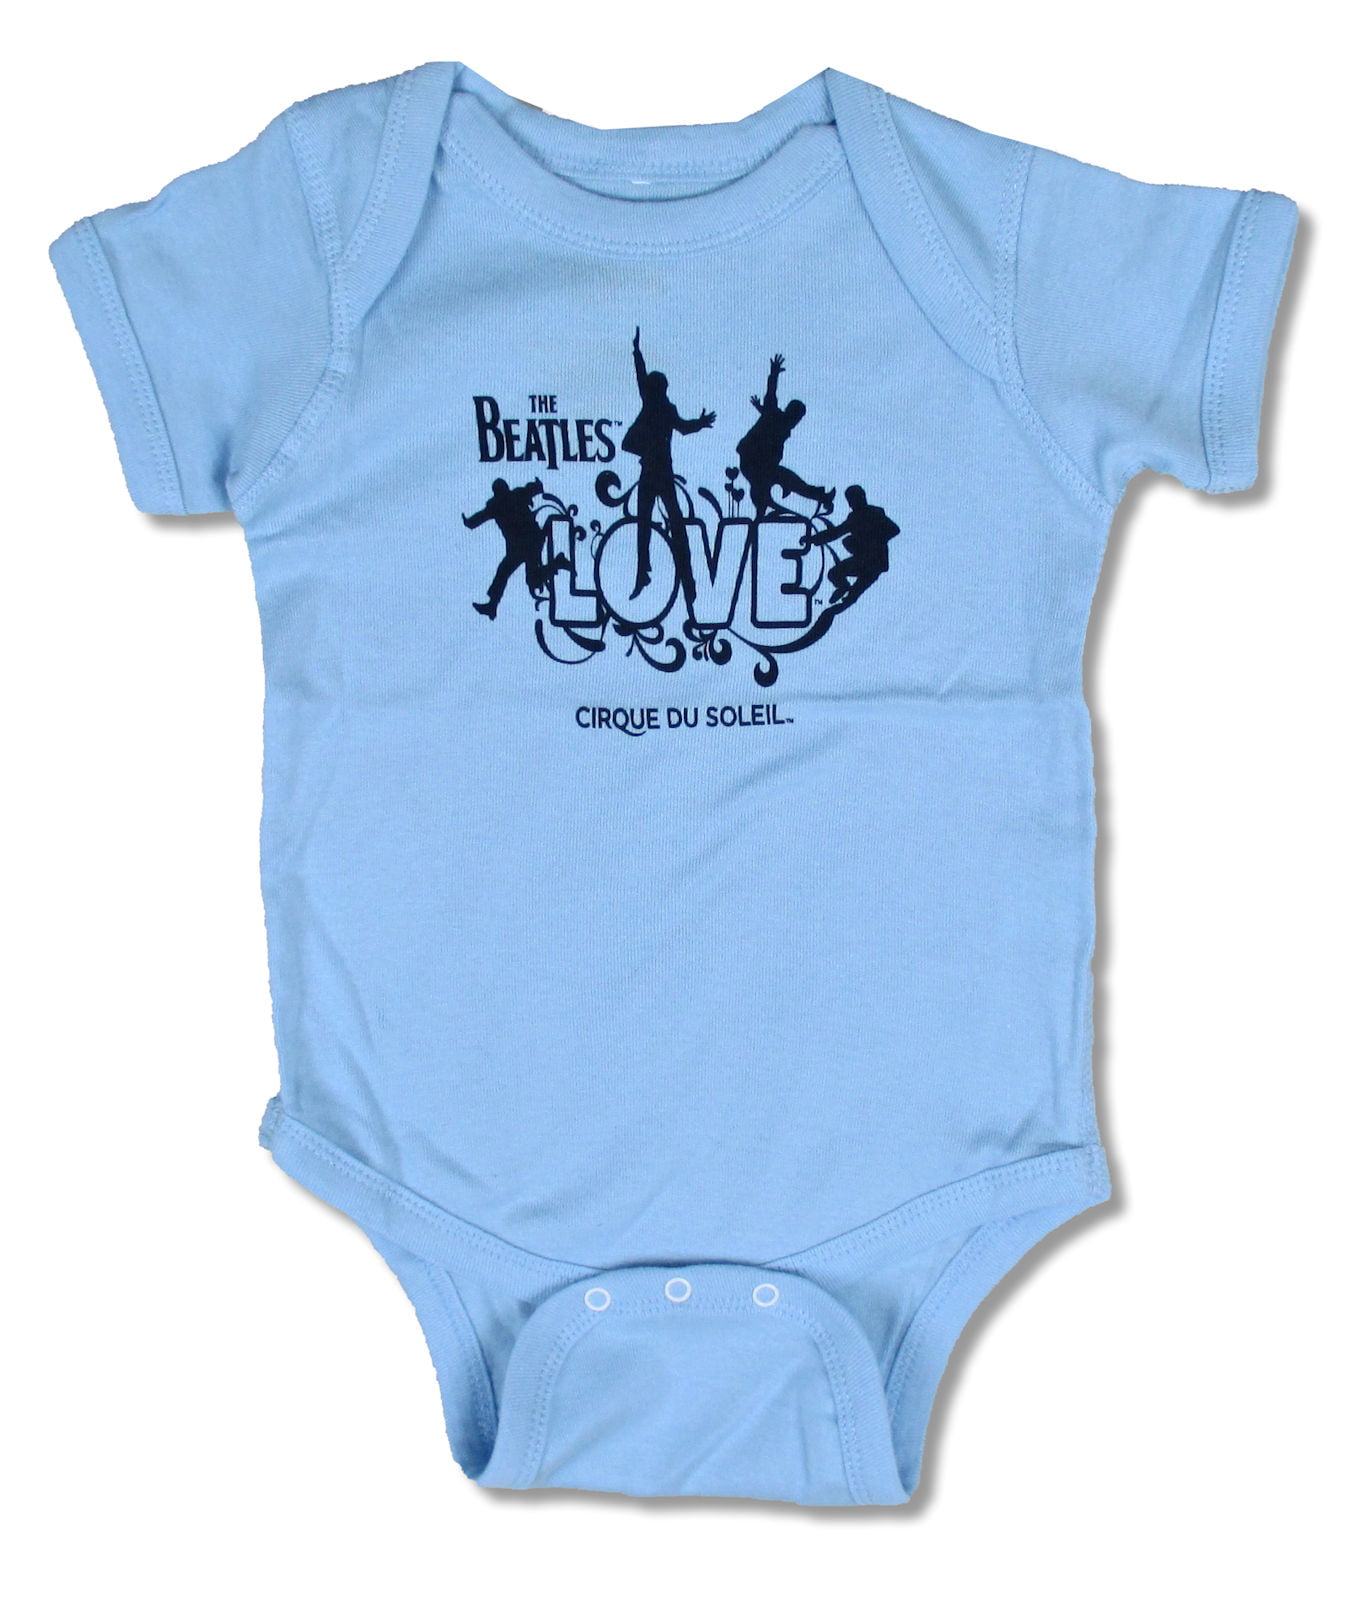 BEATLES Pop Rock ALL YOU NEED IS LOVE Baby Infant Toddler CLOTHING BODYSUIT New 